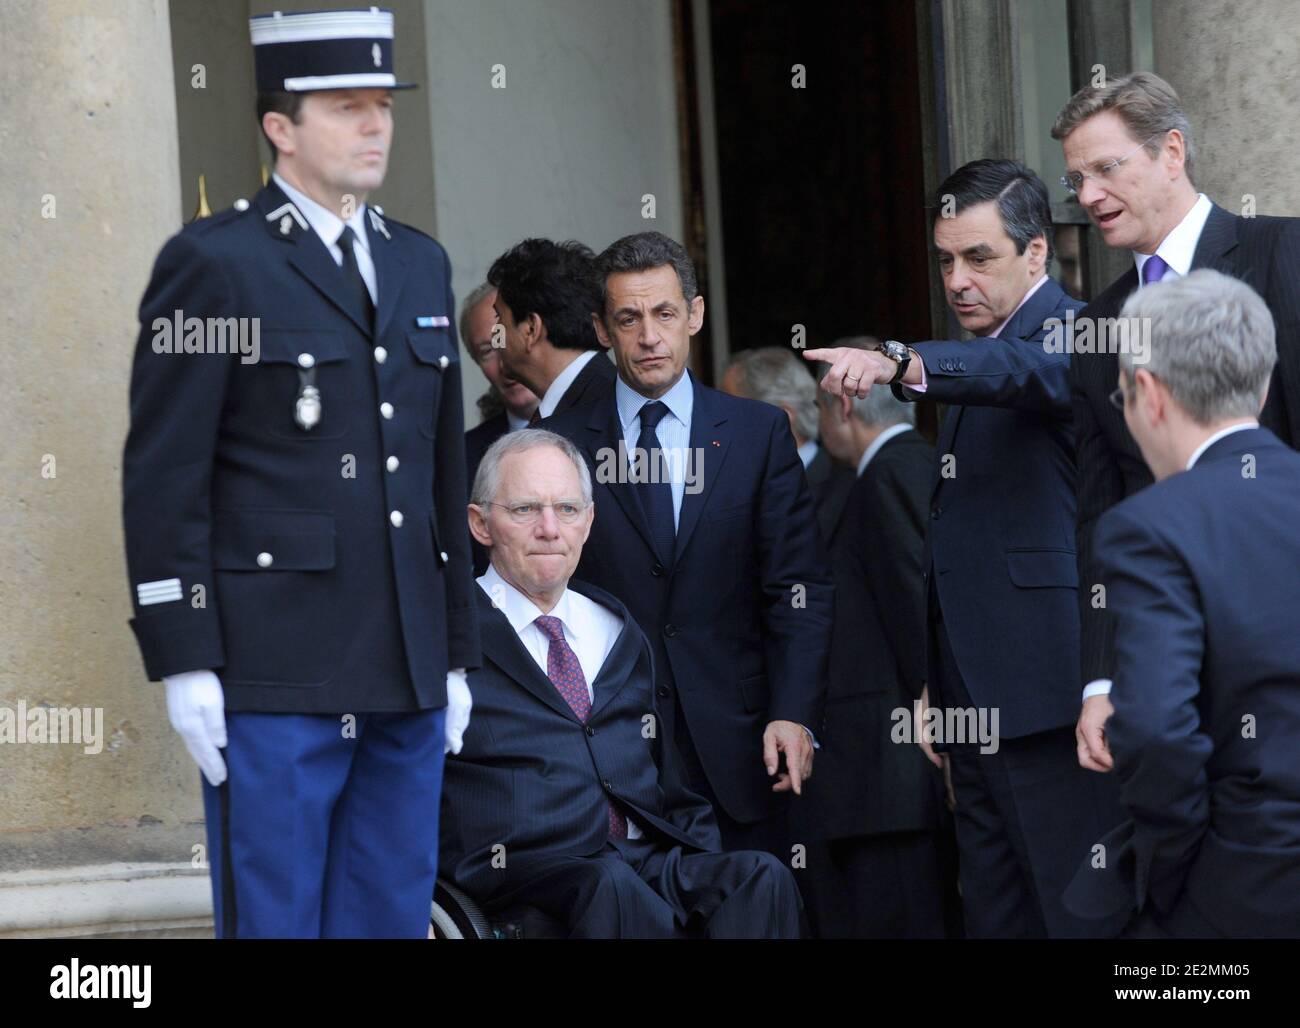 French President Nicolas Sarkozy, German Federal Minister of Finance, Wolfang Schaeuble, Prime Minister Francois Fillon, German Foreign Minister and vice-chancellor Guido Westerwelle are pictured after the Franco-German cabinet meeting in Paris, France, on February 4, 2010. Photo by Mousse/ABACAPRESS.COM Stock Photo